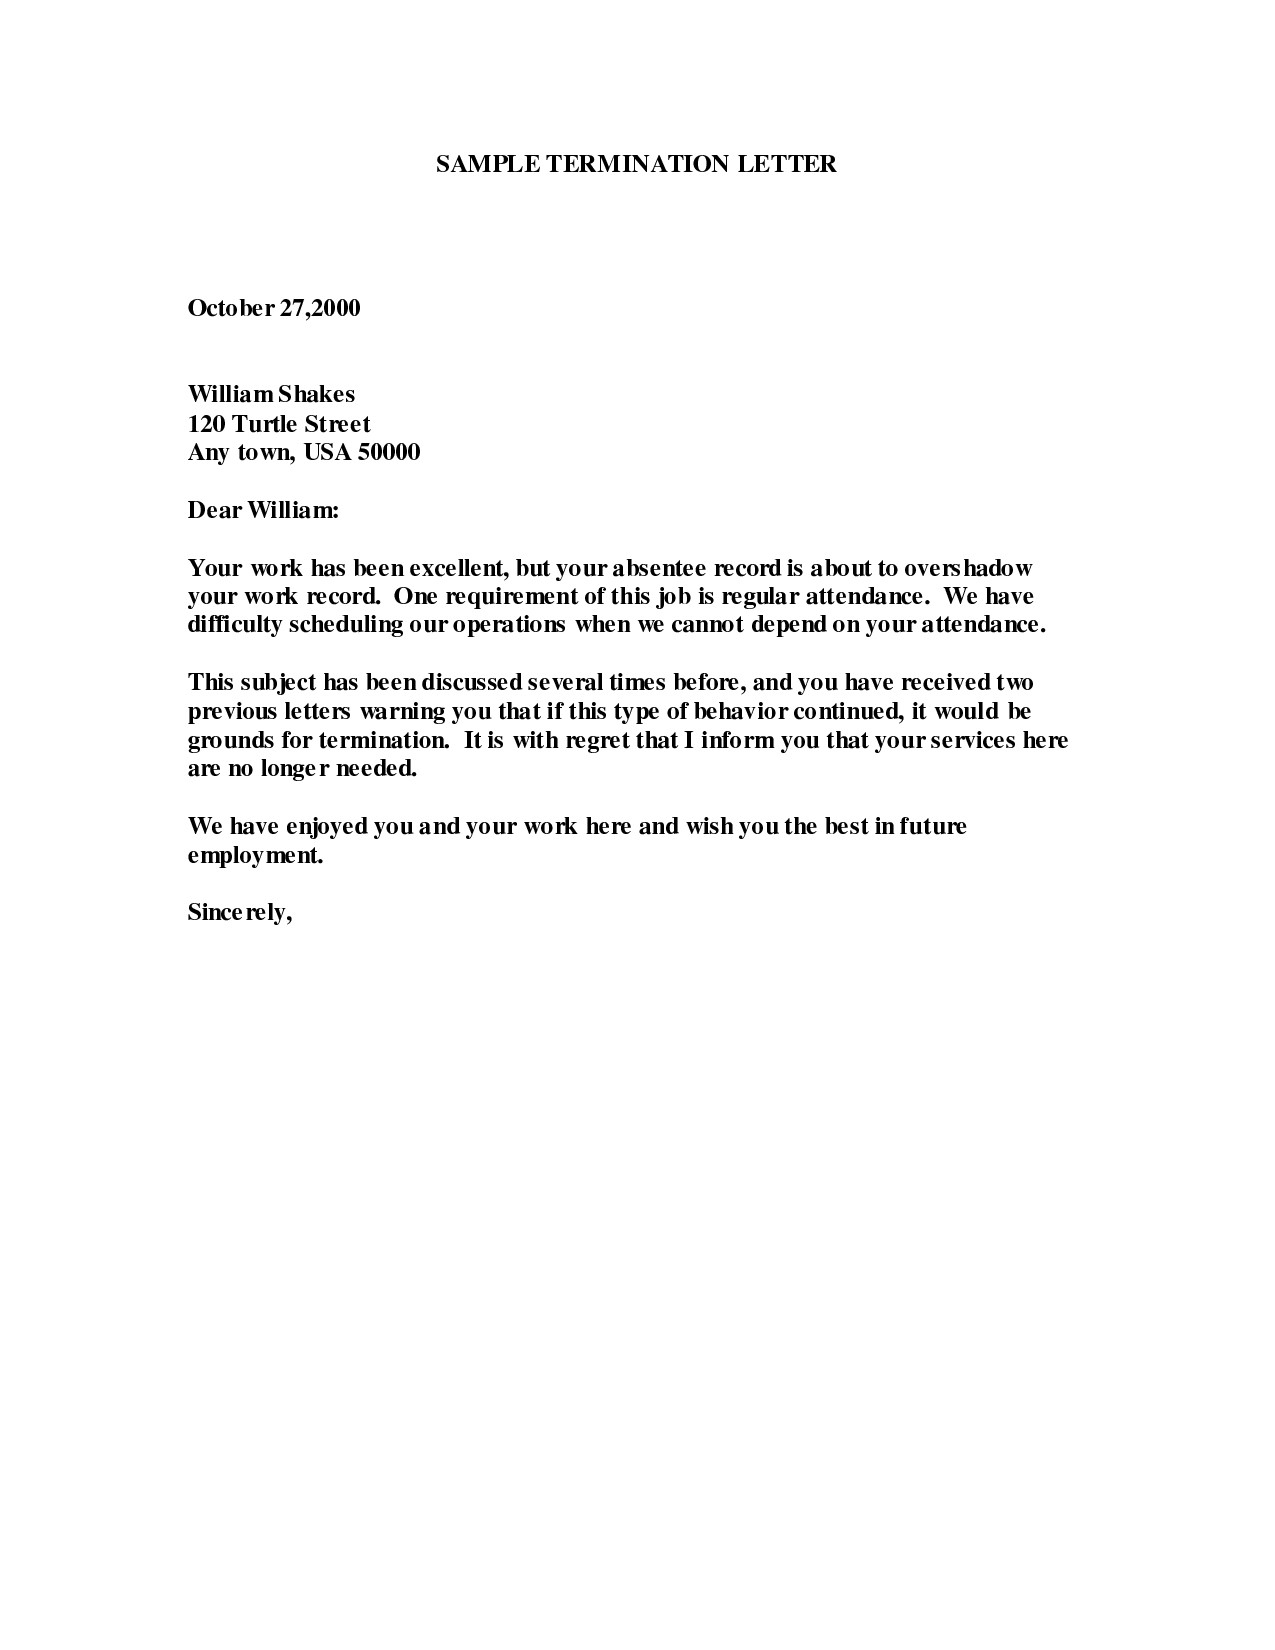 Sample Employee Termination Letter Template - Service Contract Cancellation Letter Sample Luxury Sample